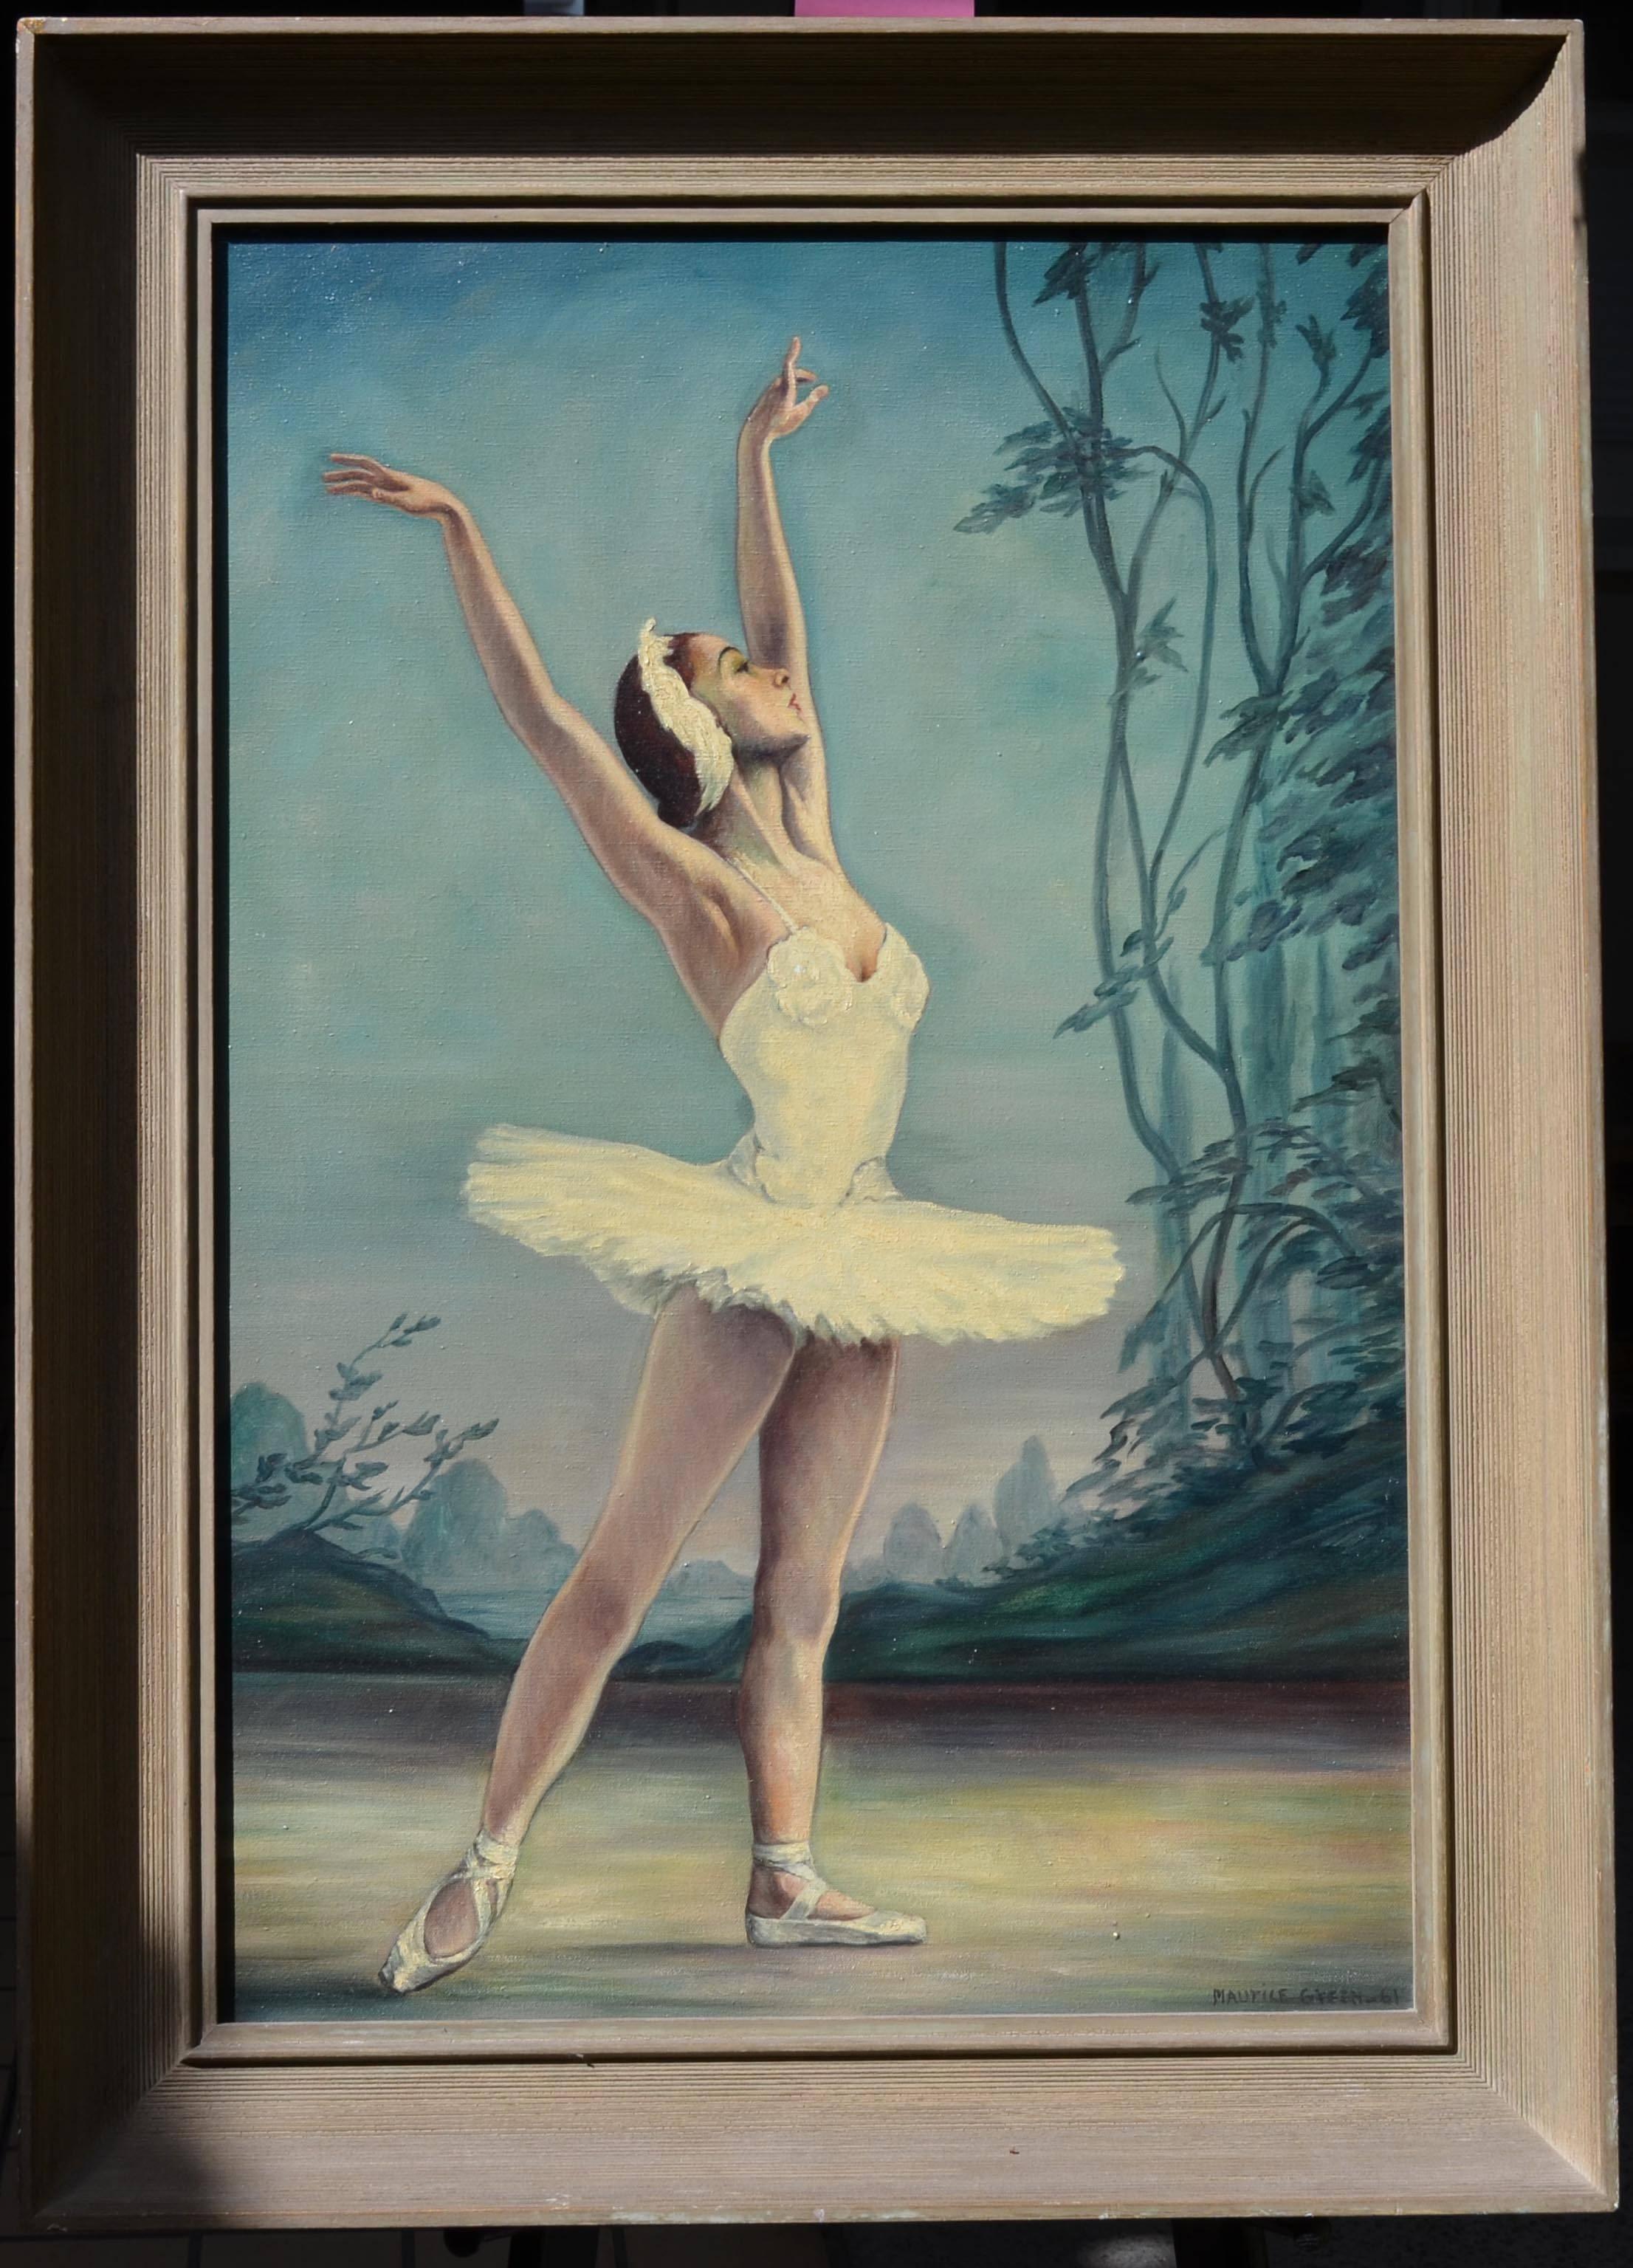 Center Stage - Painting by Maurice Green